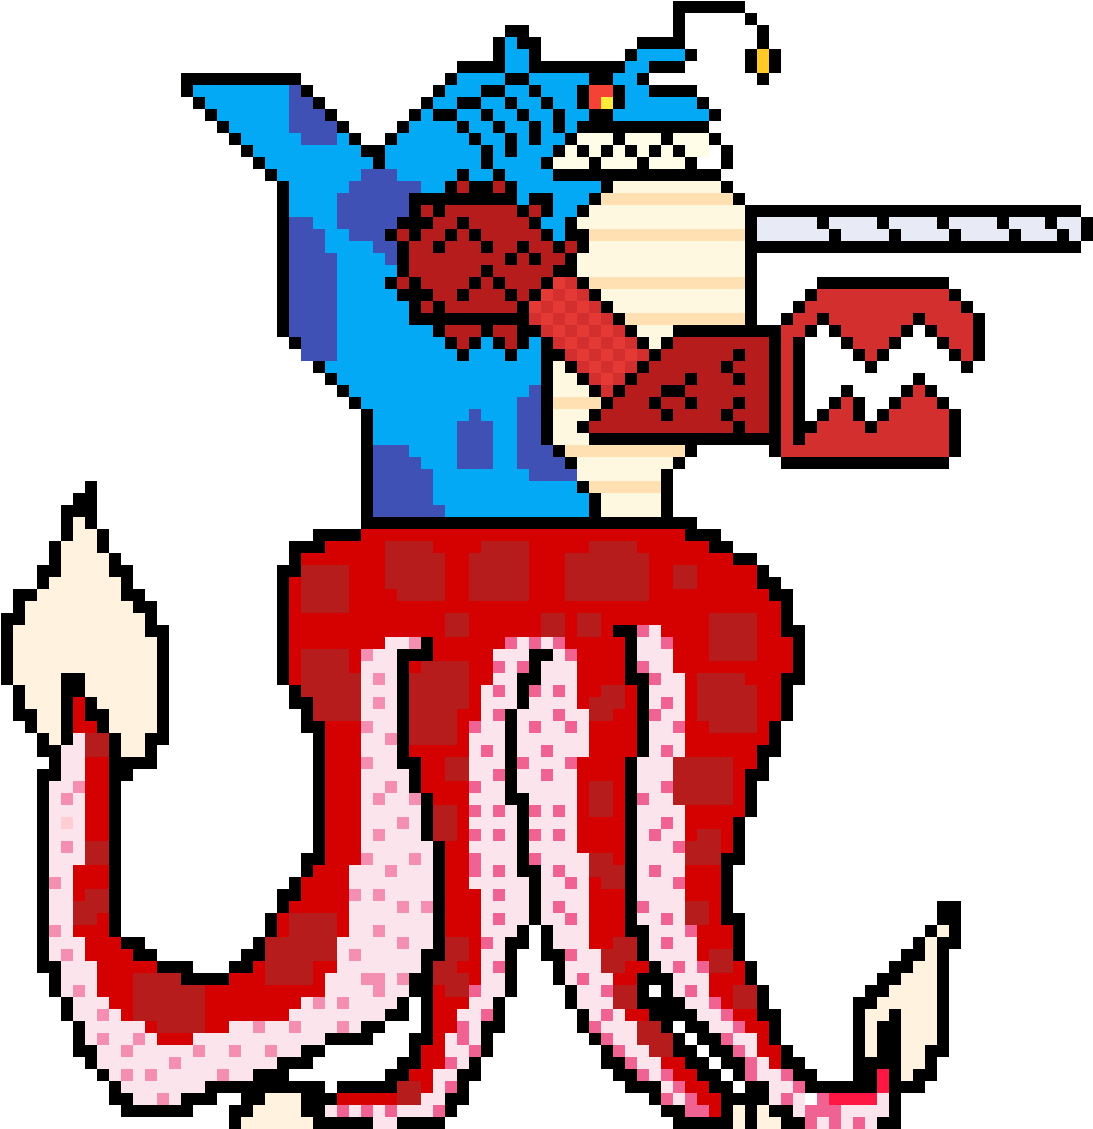 A Pixel Art Of A Man Holding A Sword And A Octopus